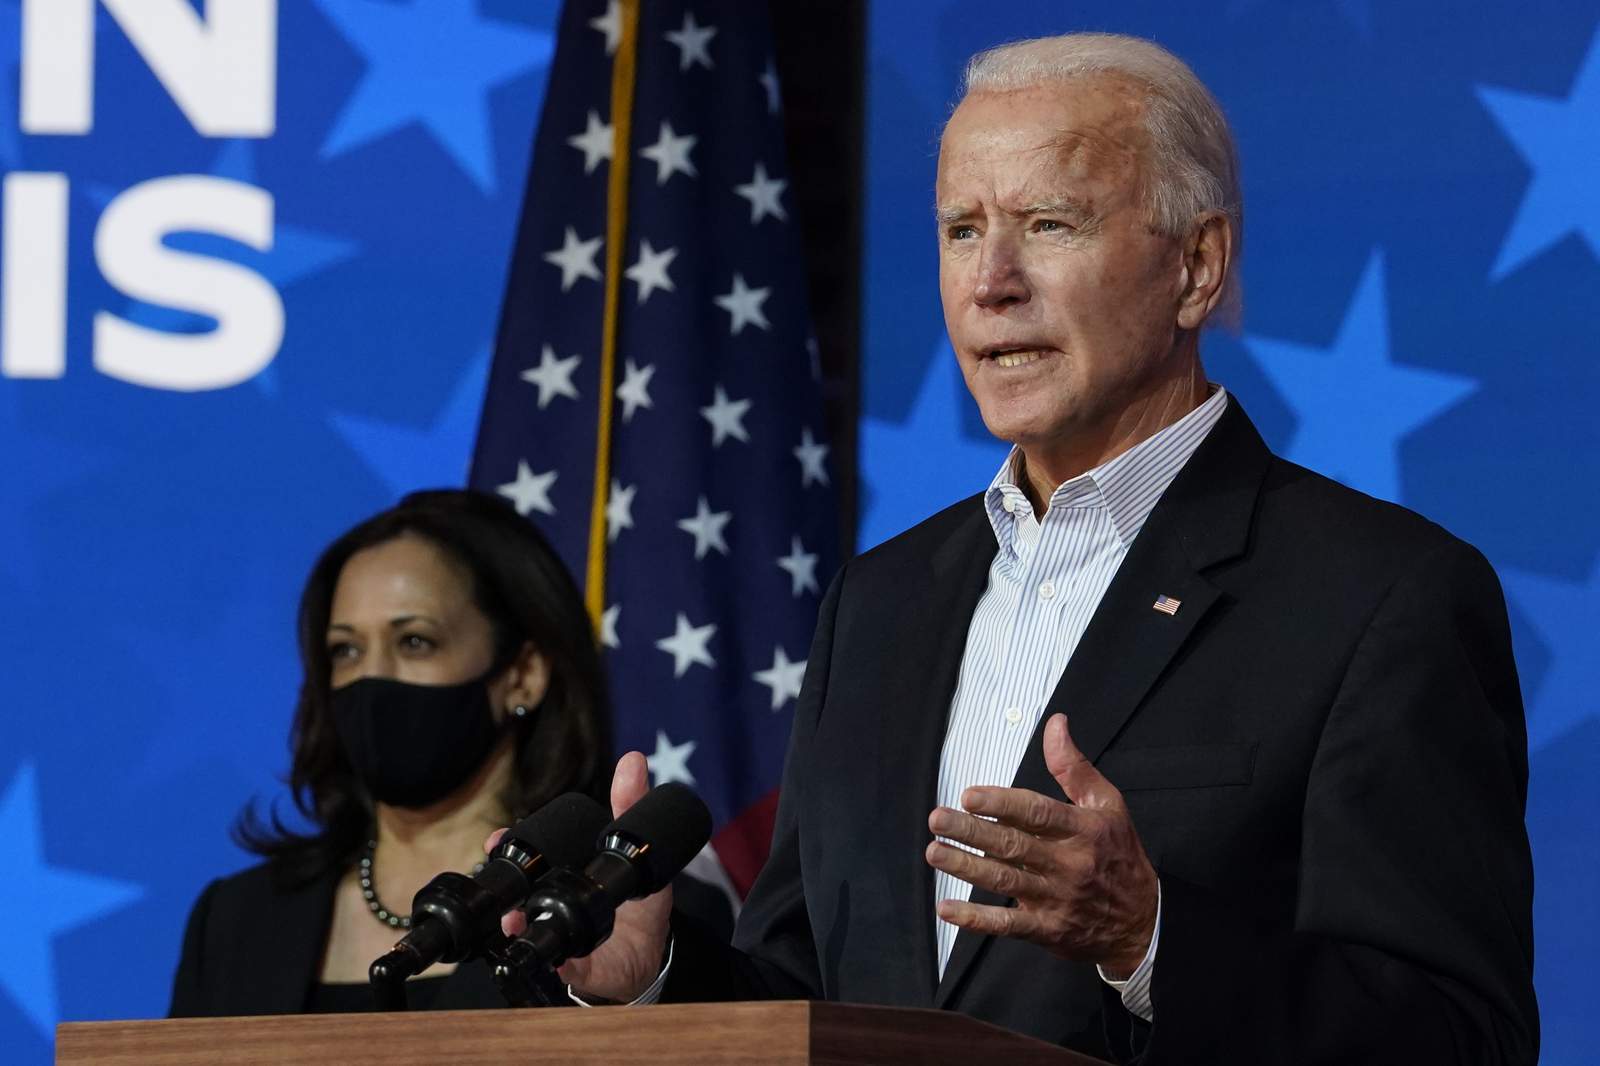 Biden planning to give prime-time address tonight